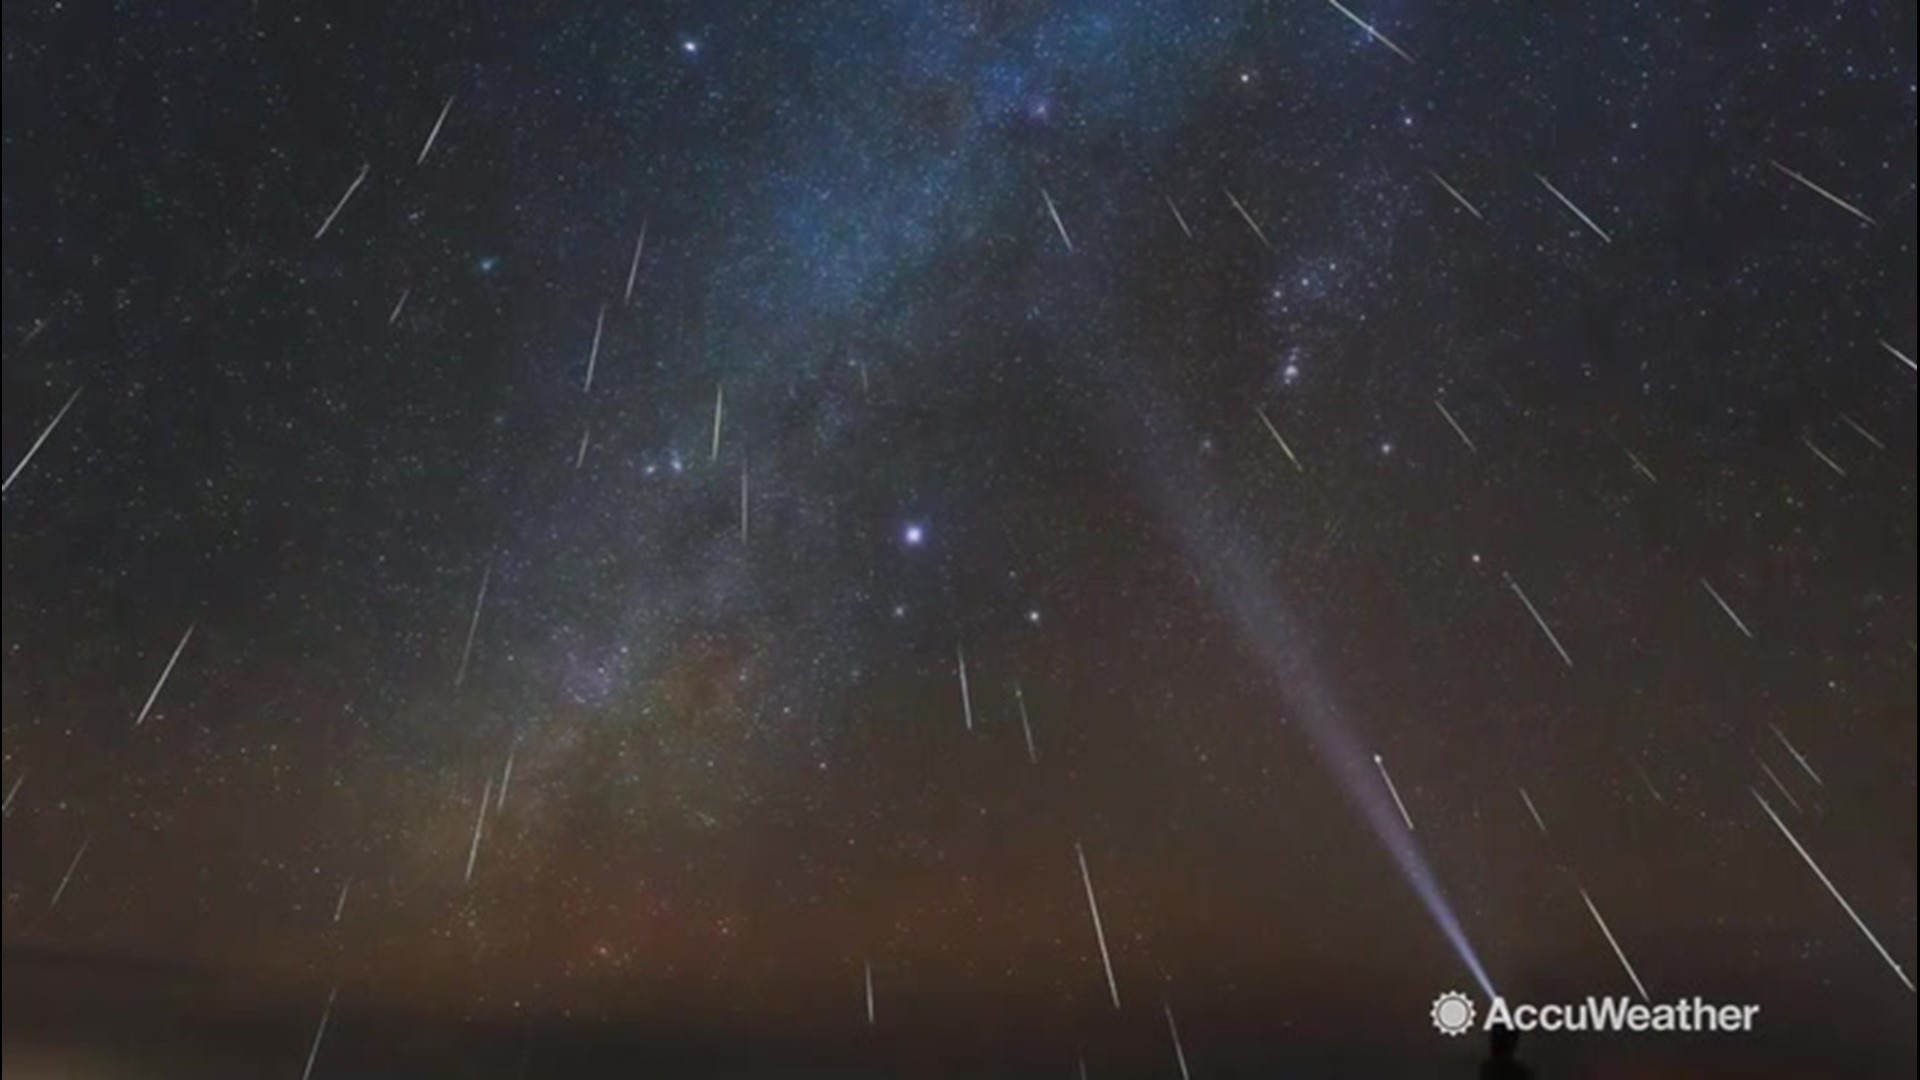 The night of Dec. 13-14 is the peak of the Geminid Meteor Shower, arguably one of the best showers of the year with 150 meteors per hour.